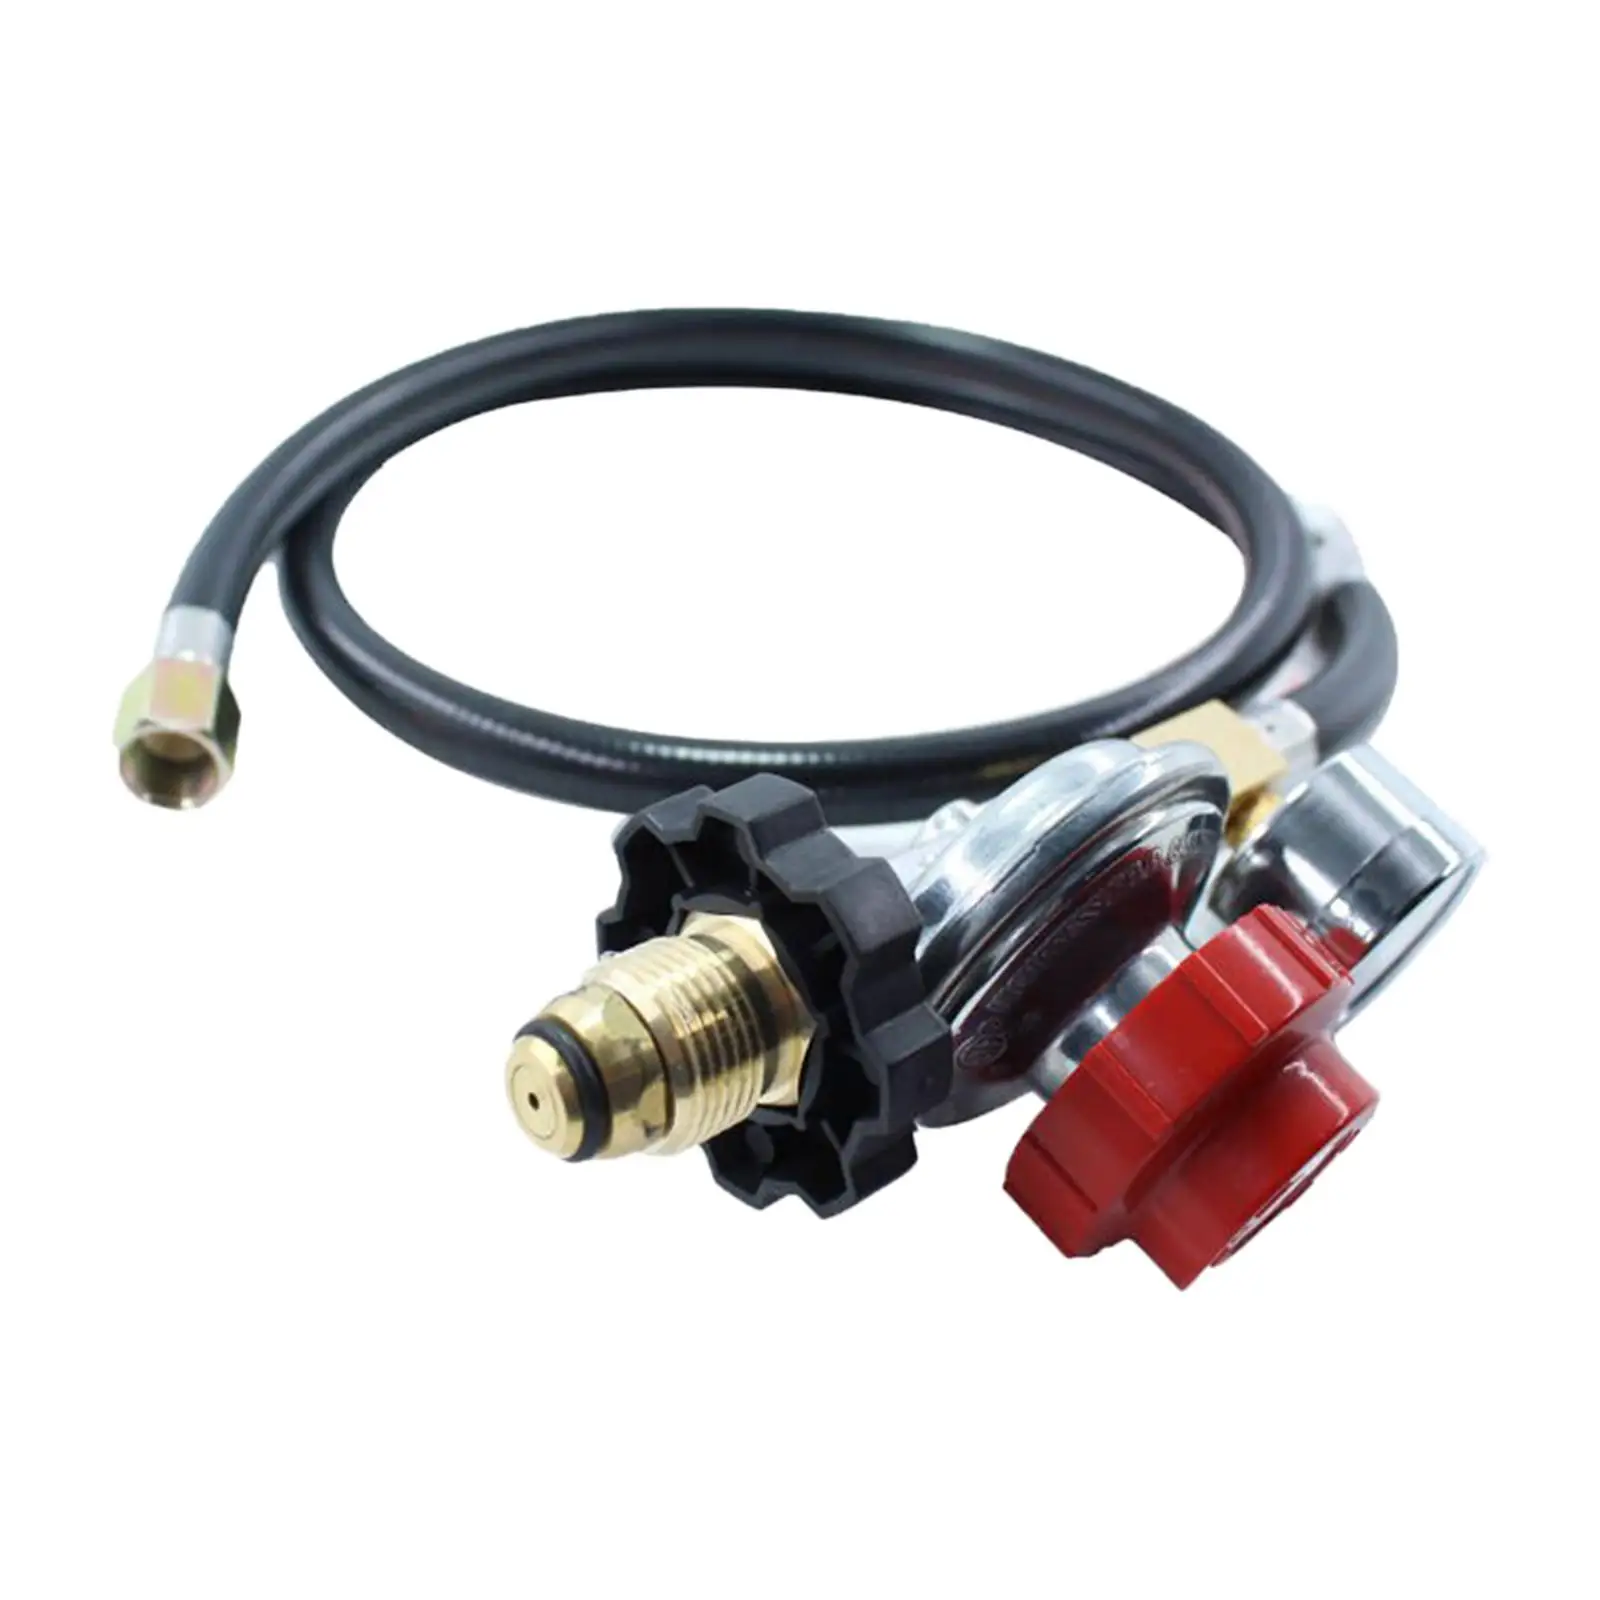 High Pressure Gas Regulator 30PSI with Gauge and Hose Indicator Pol Connector Replacement for Fire Gas Cooker BBQ Supply